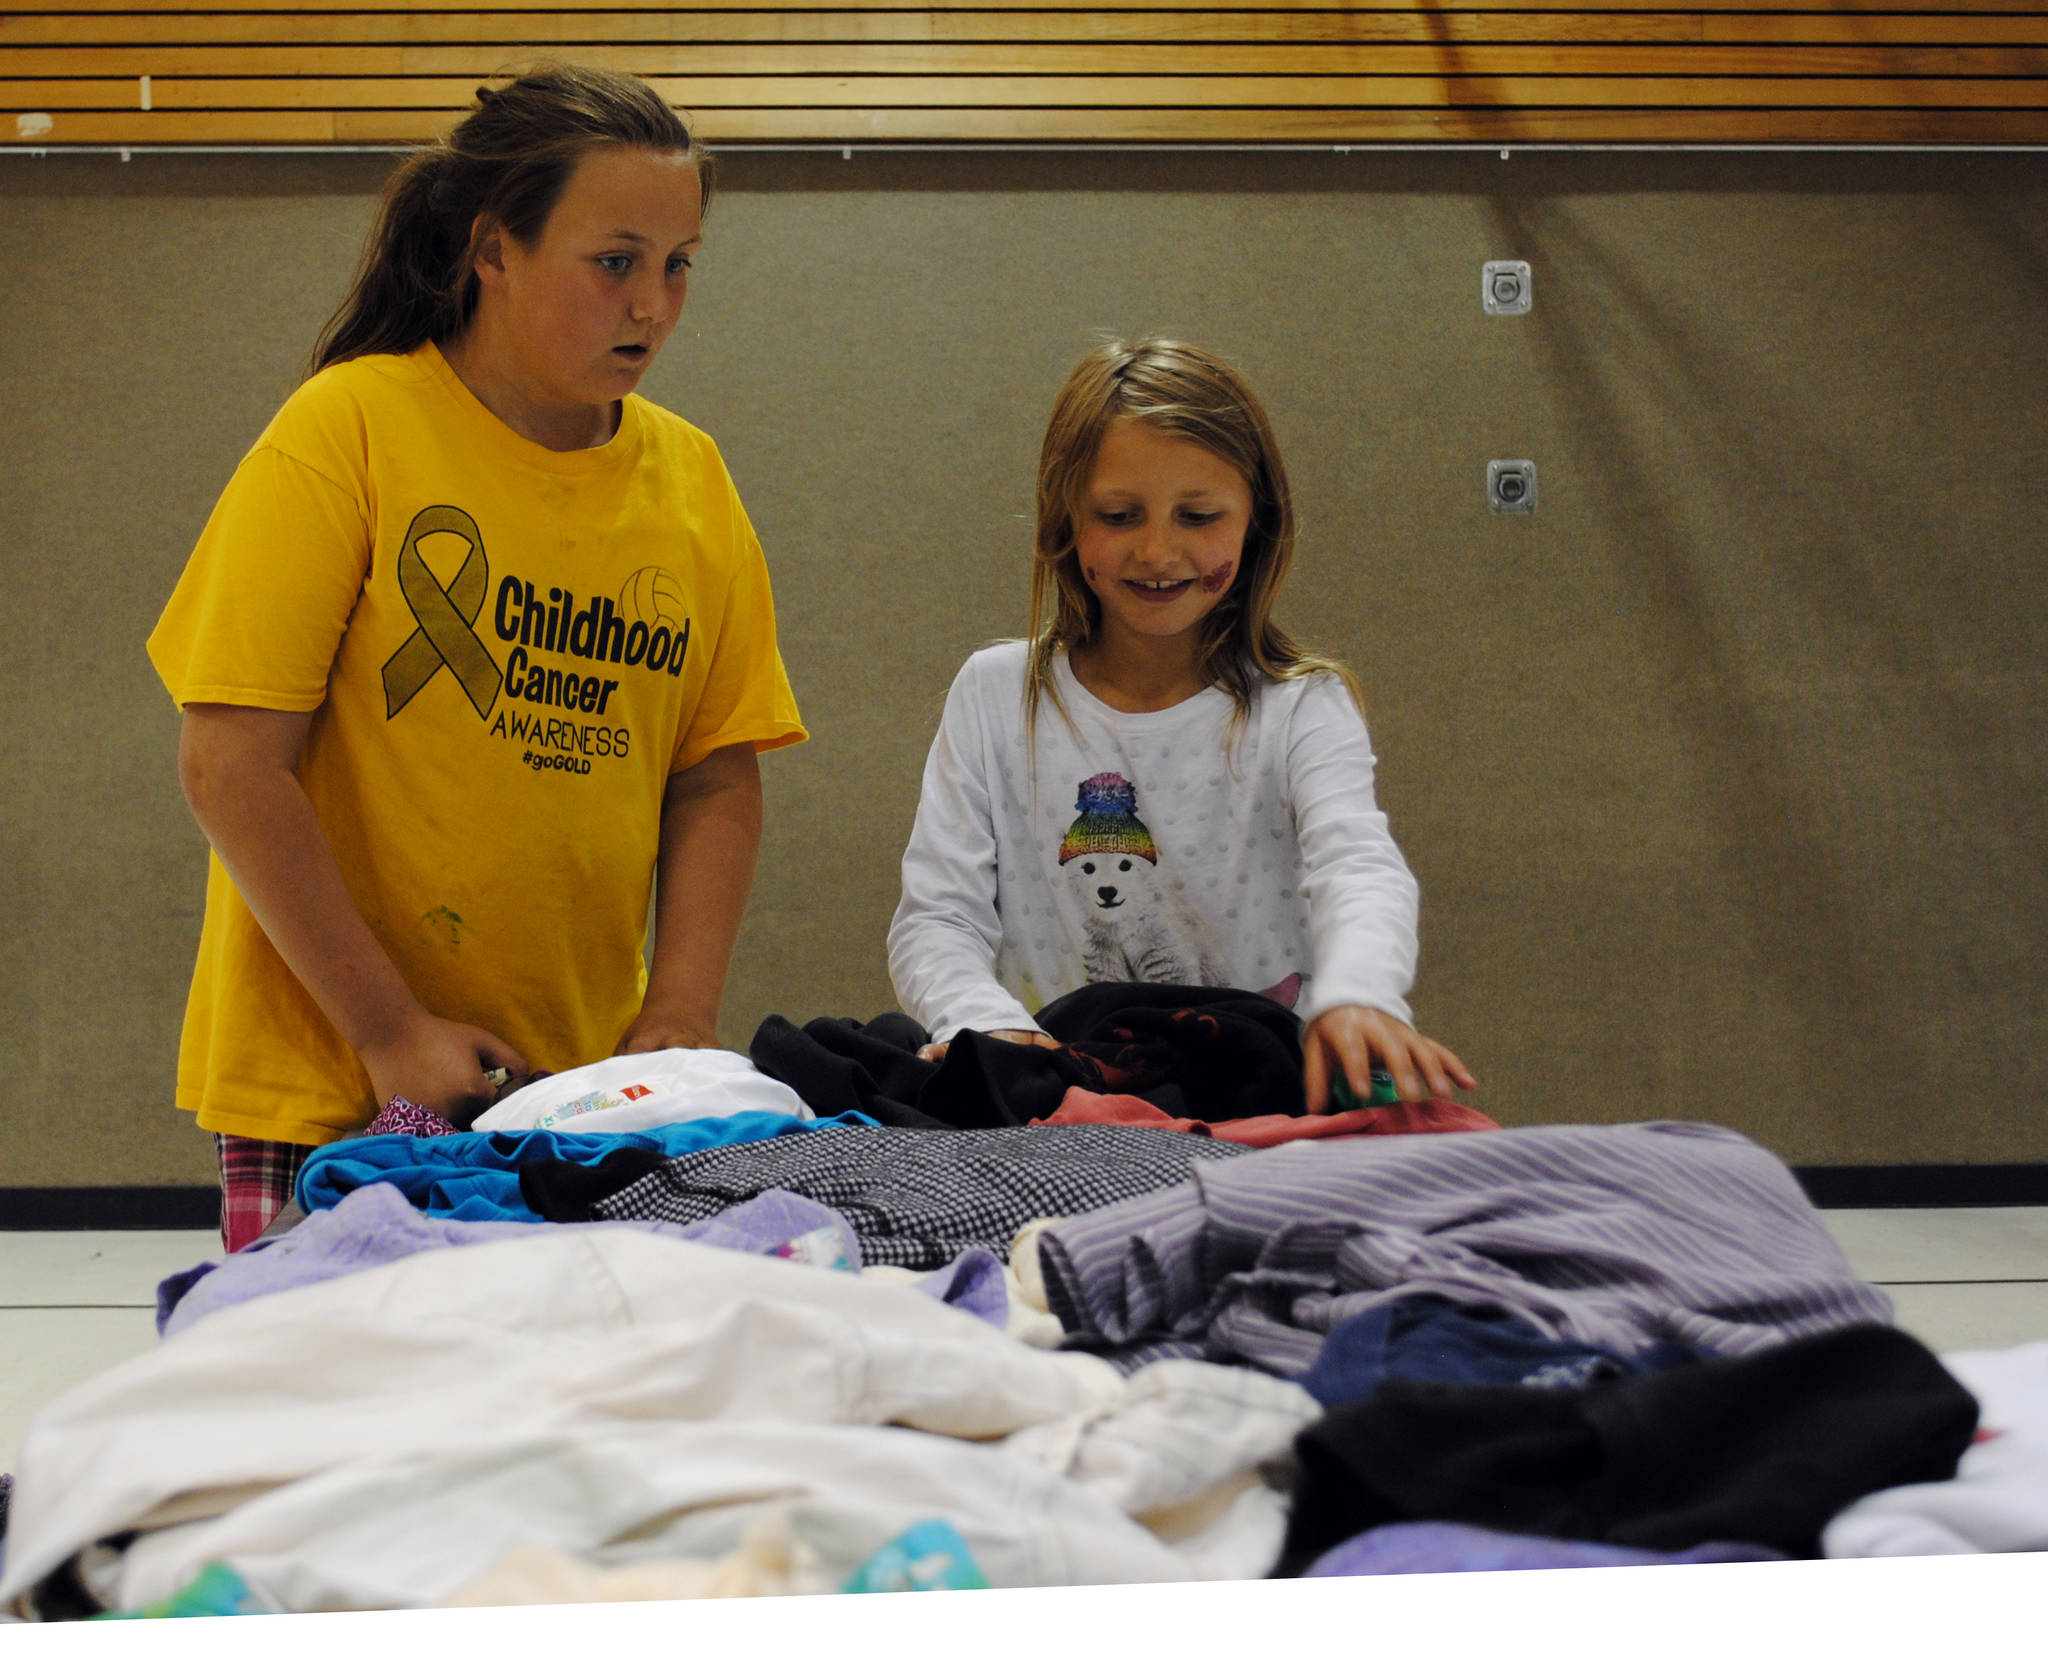 Taci Bettis (left) and Harmony Enders look through some clothes at Nikiski North Star Elementary School during the Boys & Girls Club of the Kenai Peninsula event offering free clothes, shoes and books on Monday, July 31, 2017 in Nikiski, Alaska. (Photo by Kat Sorensen/Peninsula Clarion)